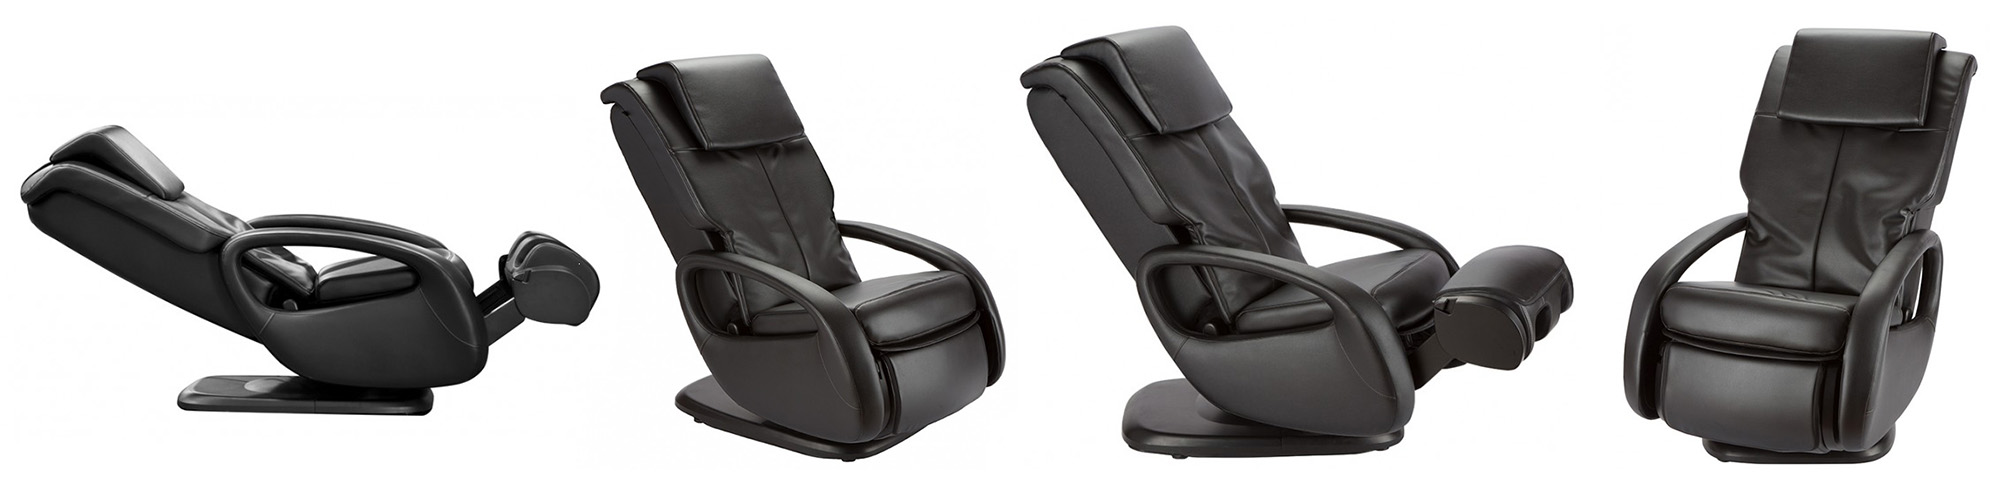 https://vitalityweb.com/backstore/HumanTouch/pics/Human-Touch-WholeBody-51-Massage-Chair-Recliner-Series.jpg